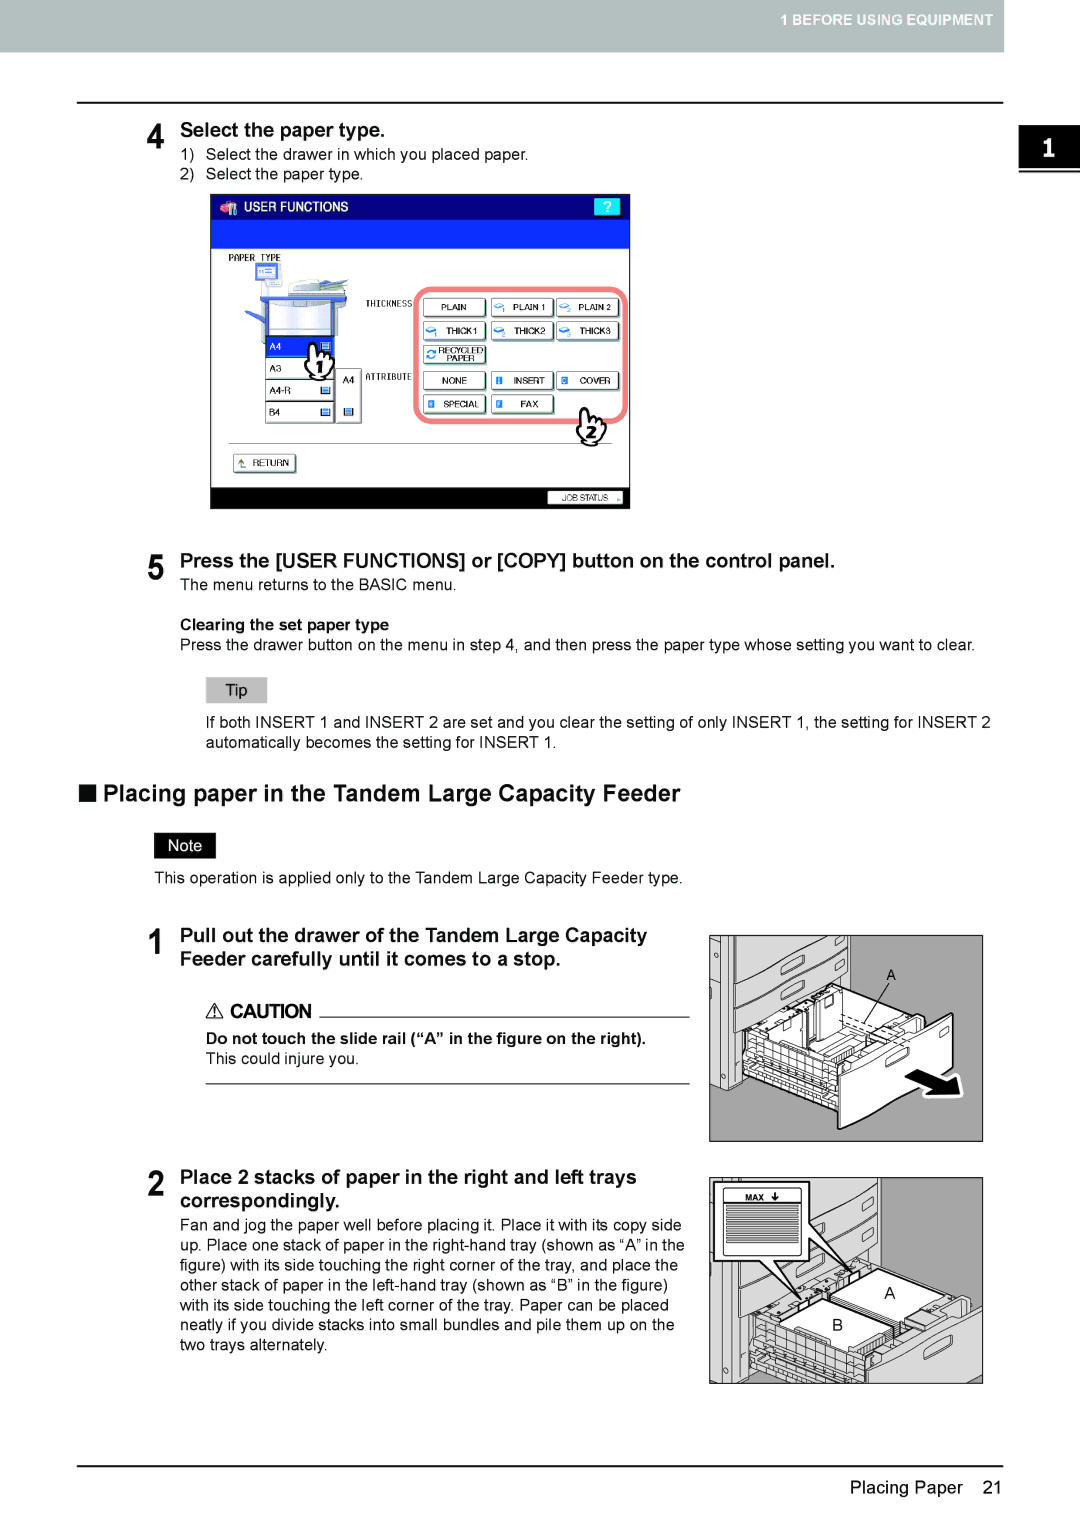 Toshiba e-STUDIO5520C, 6520c manual „ Placing paper in the Tandem Large Capacity Feeder, Select the paper type 